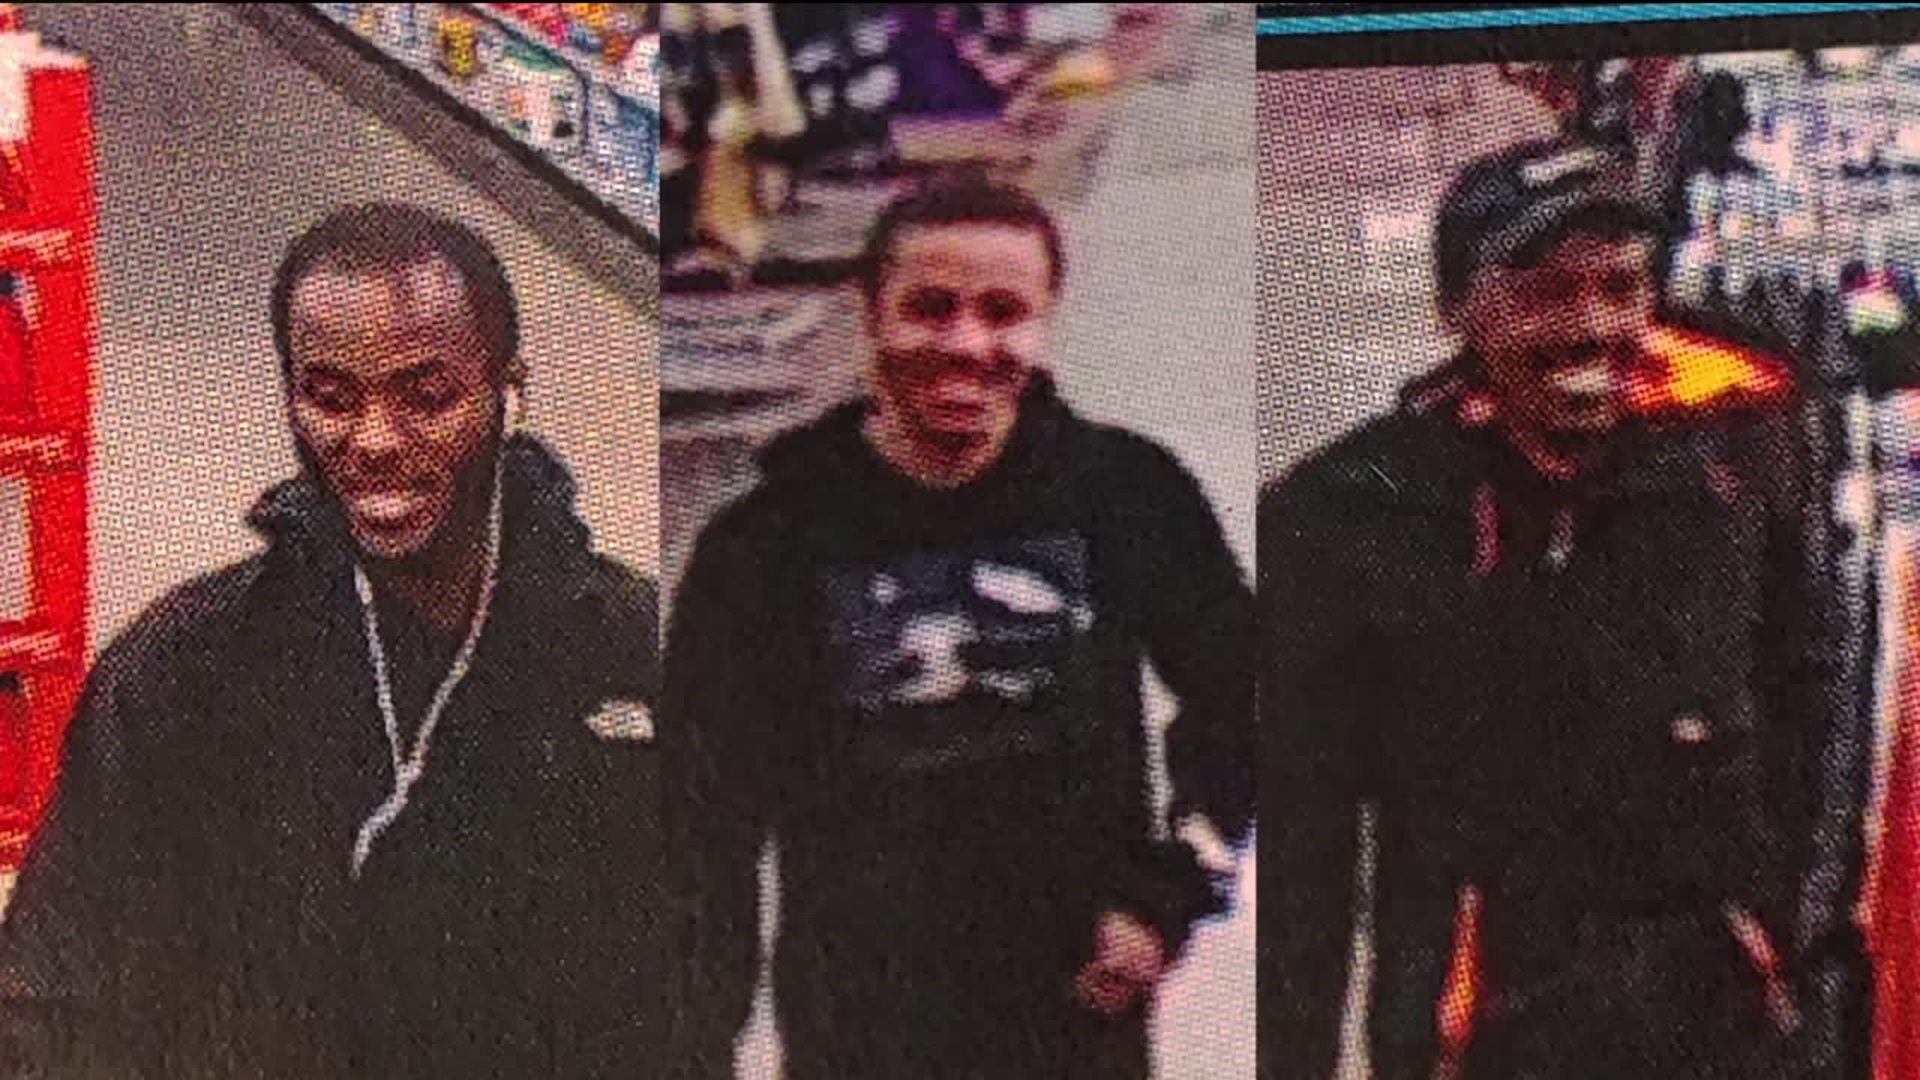 Three Men Caught on Camera Stealing Thousands From Walmarts in Two-County Spree